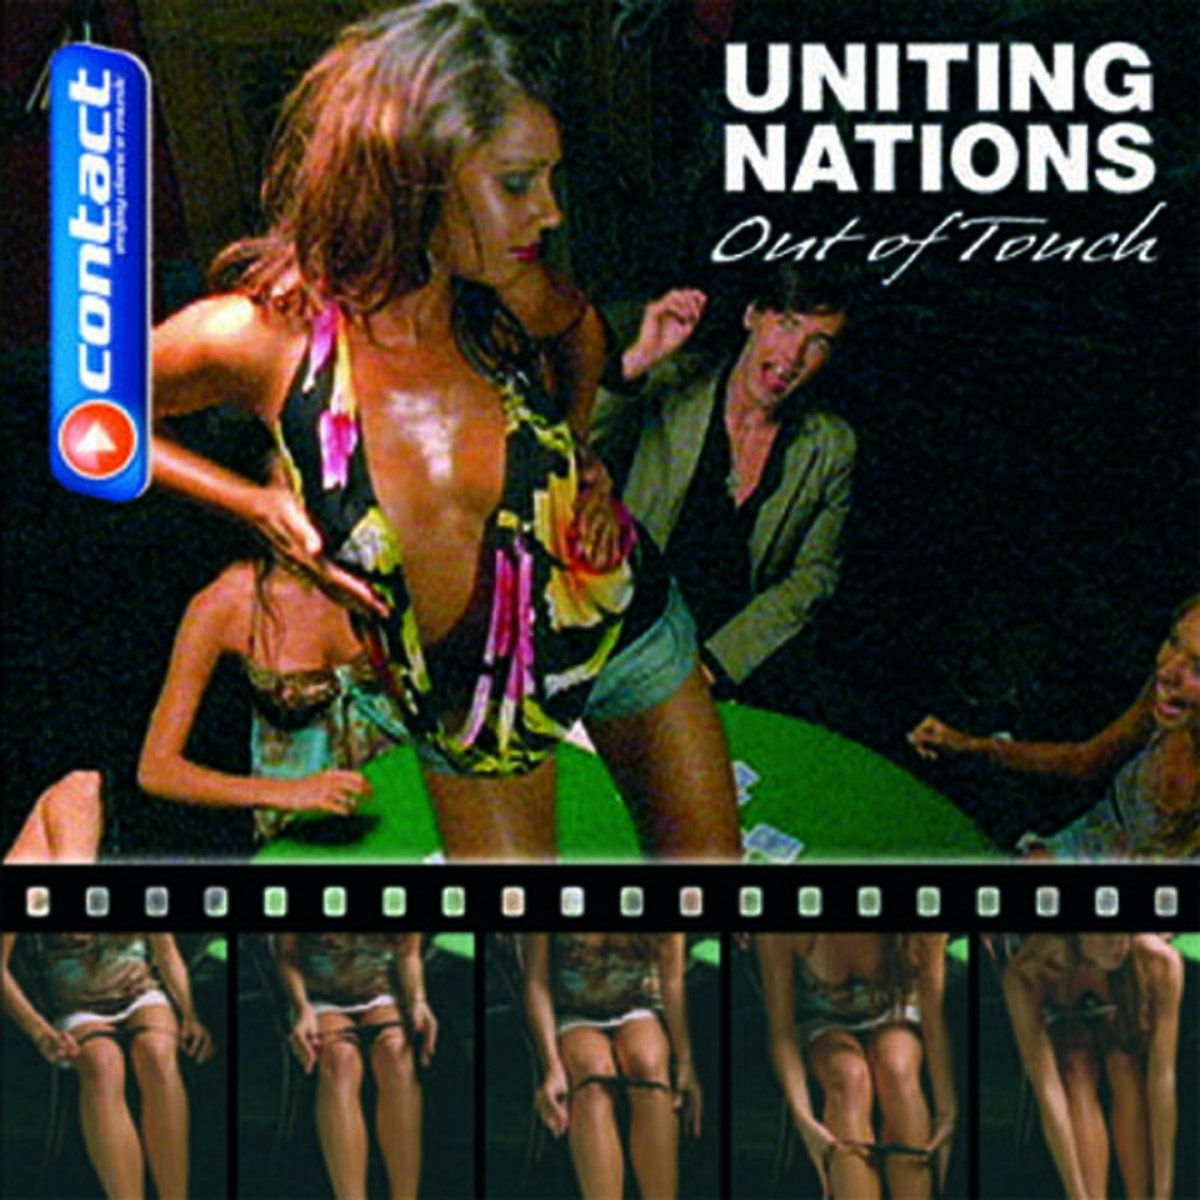 UNITING NATIONS - Out Of Touch